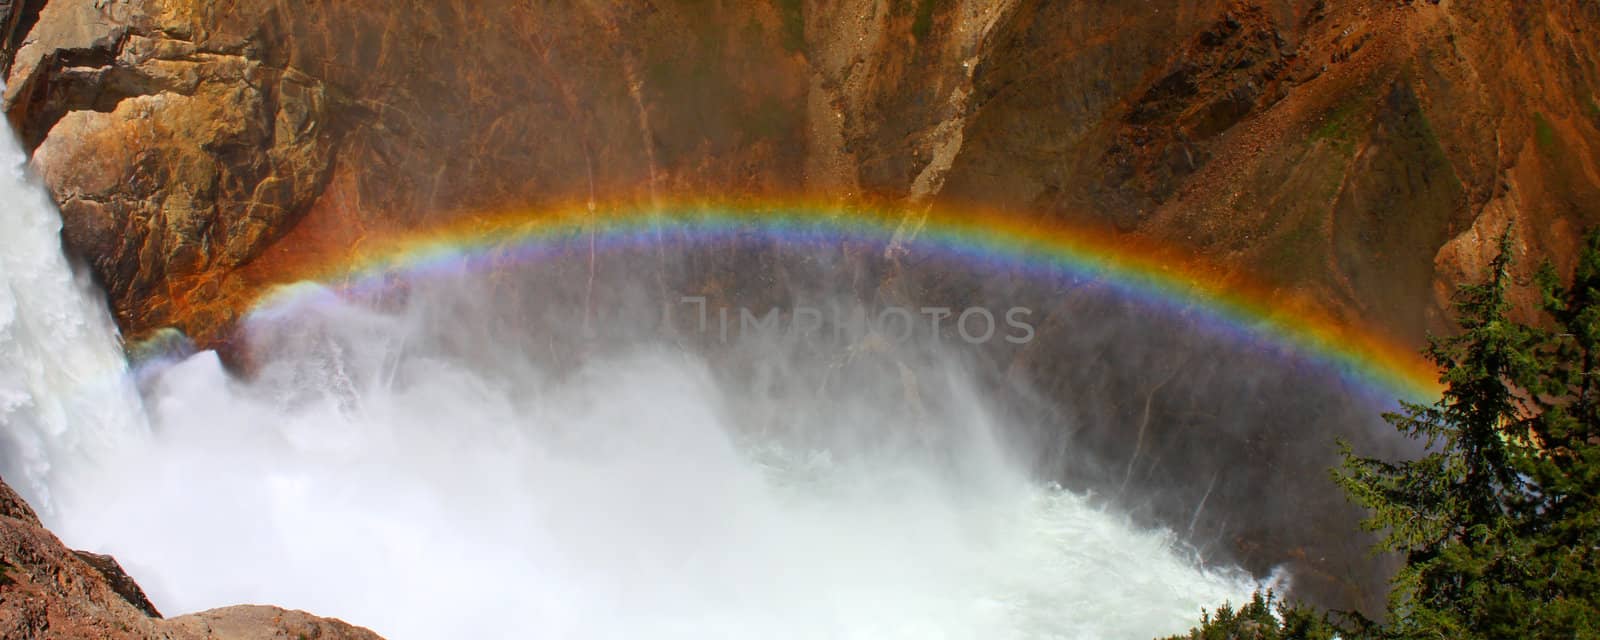 Sunlight creates a rainbow in mists of the Lower Falls of the Yellowstone River in Wyoming.